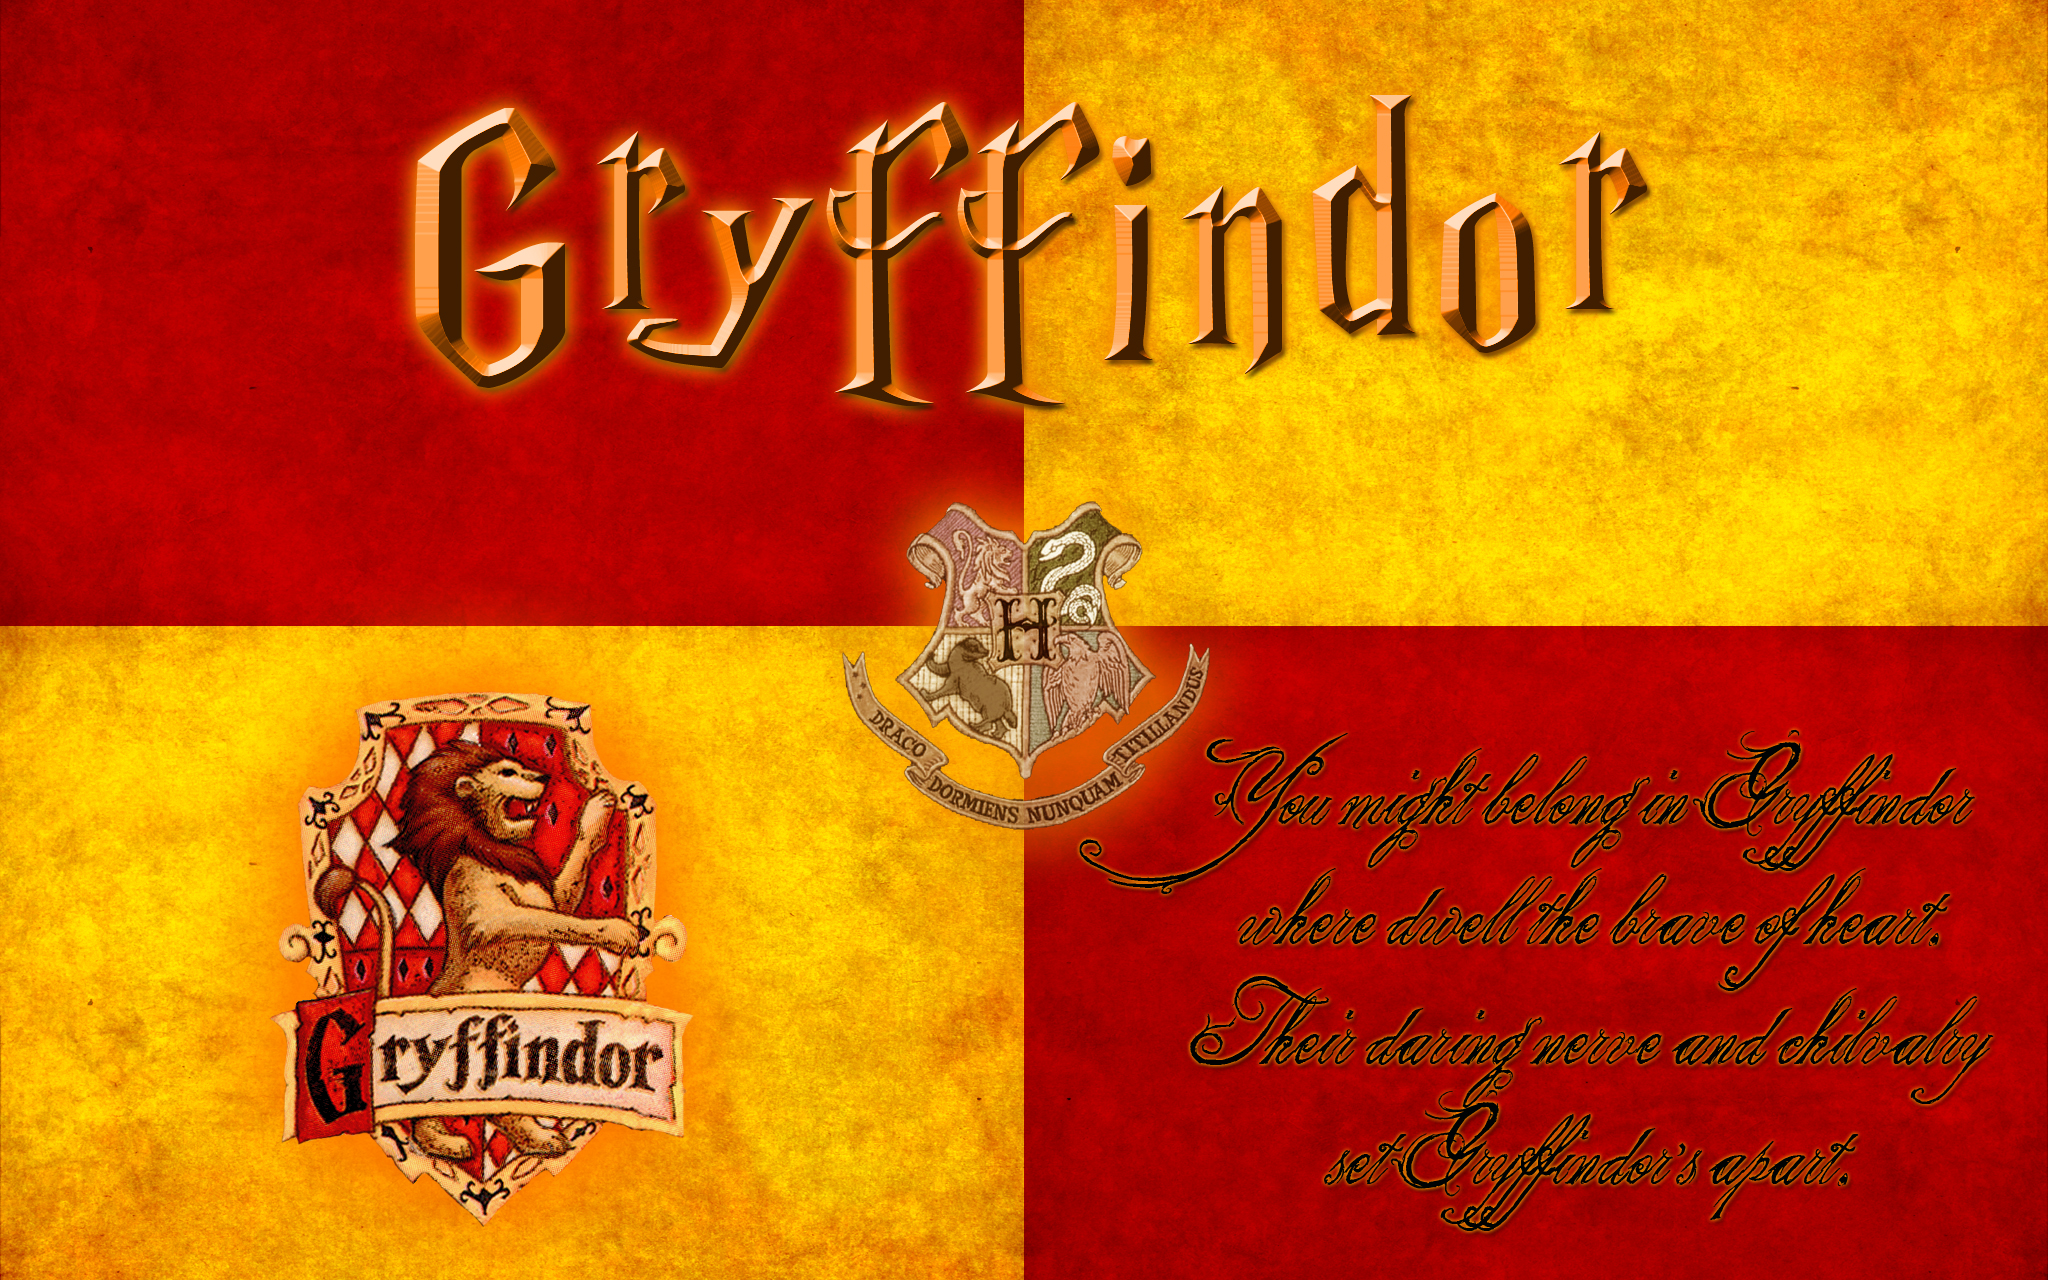 Harry Potter Image Gryffindor HD Wallpaper And Background